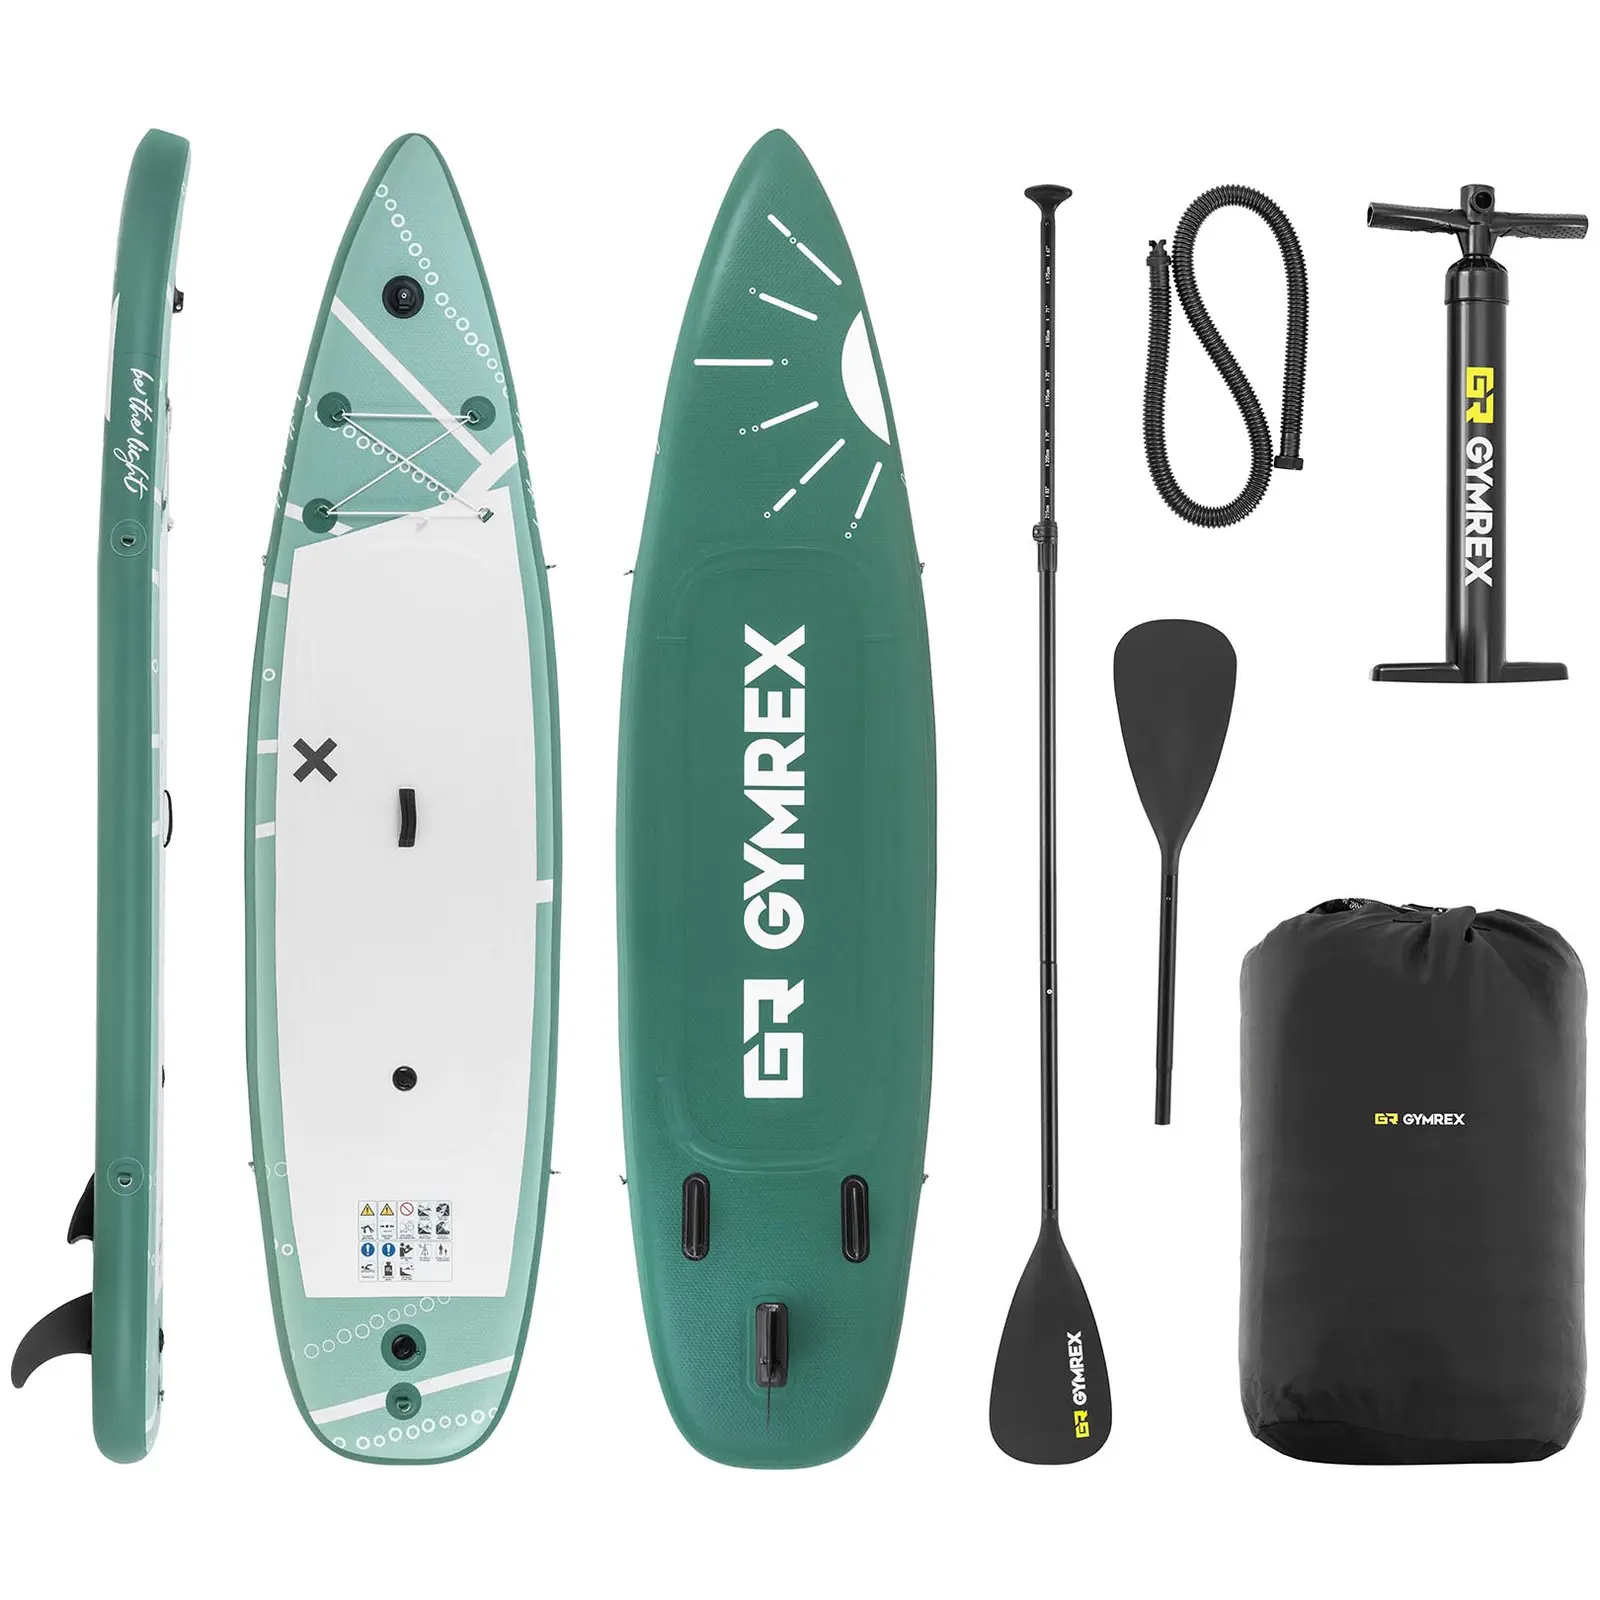 Inflatable paddle board - inflatable - 125 kg - green - double chamber - 329 x 78 x 38.5 cm